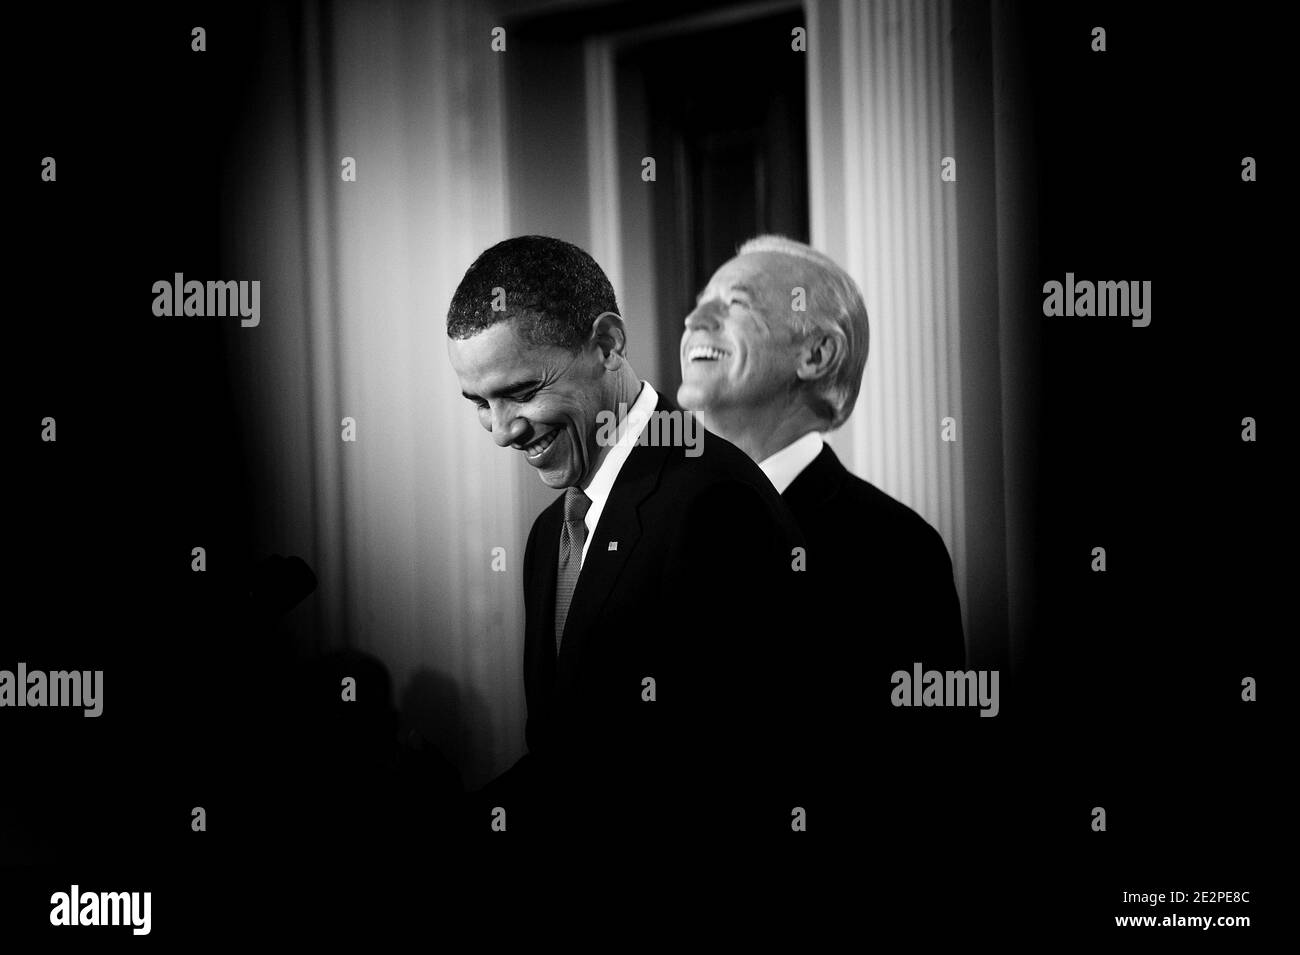 US President Barack Obama and Vice President Joe Biden smile during the signing ceremony of the health insurance reform bill in the East Room in Washington, DC, USA, on March 23, 2010. Photo by Olivier Douliery/ABACAPRESS.COM Stock Photo